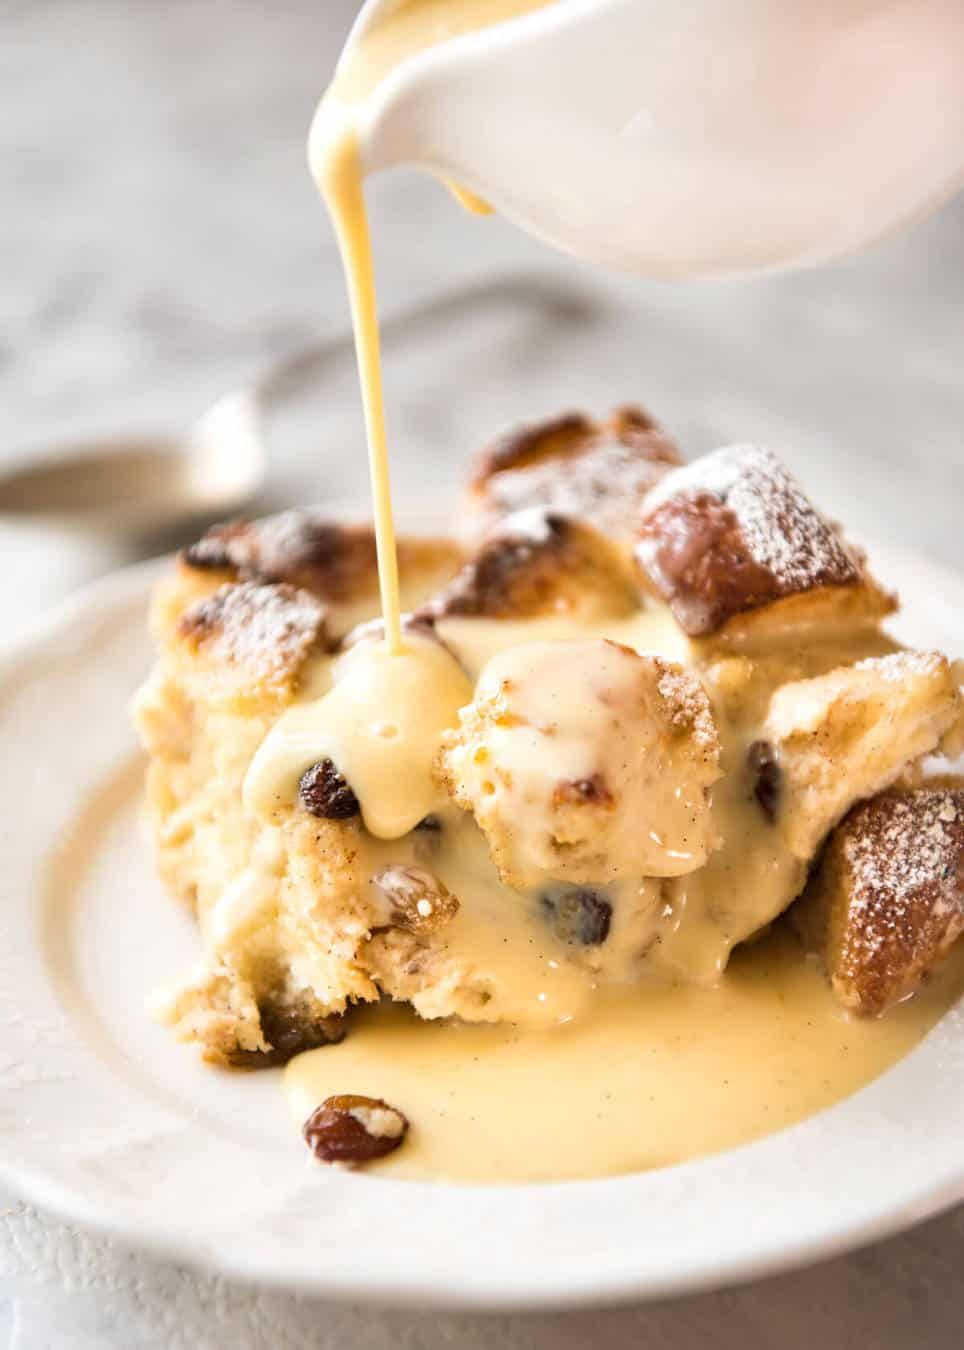 Bread & Butter Pudding to Share